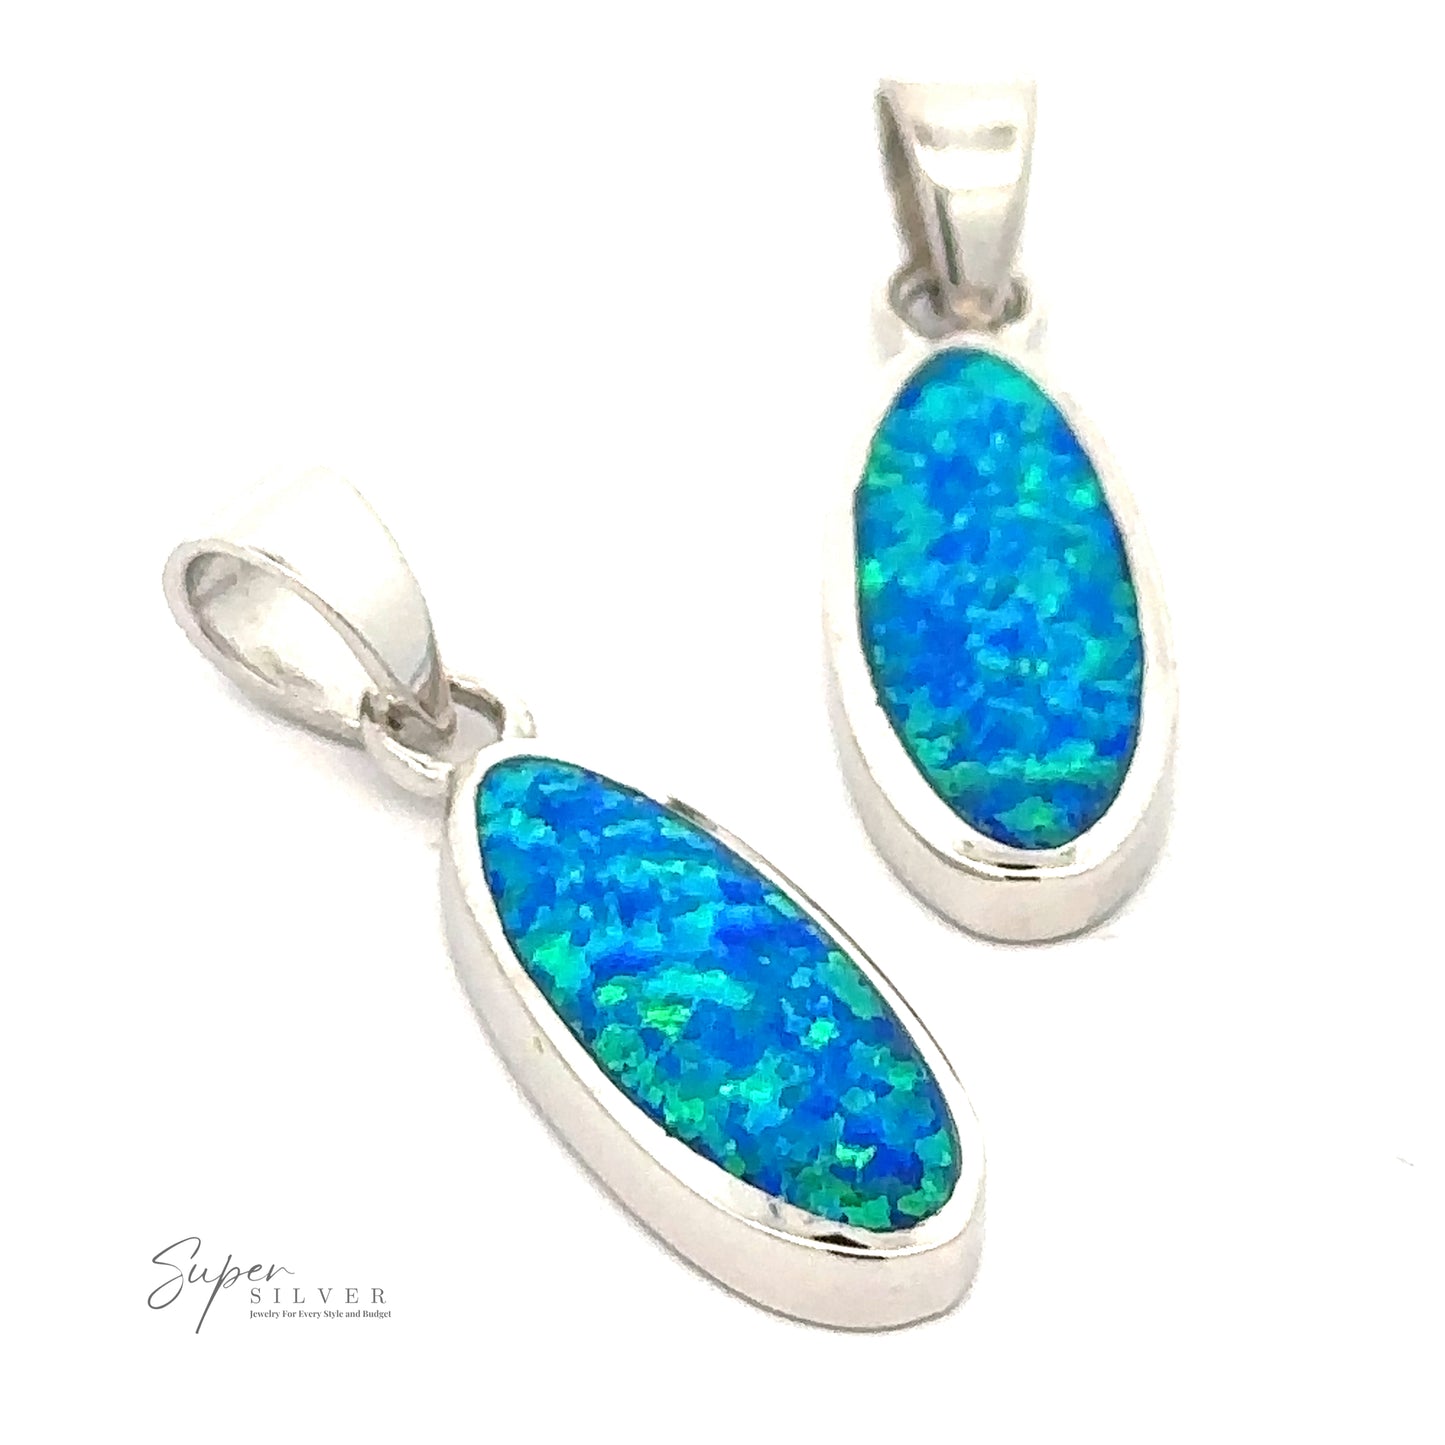 Two sterling silver pendants with oval-shaped blue and green opal stones are displayed against a white background. The pendants feature identical designs, a smooth polished rhodium finish, and showcase the captivating beauty of Blue Opal Oval Pendant.